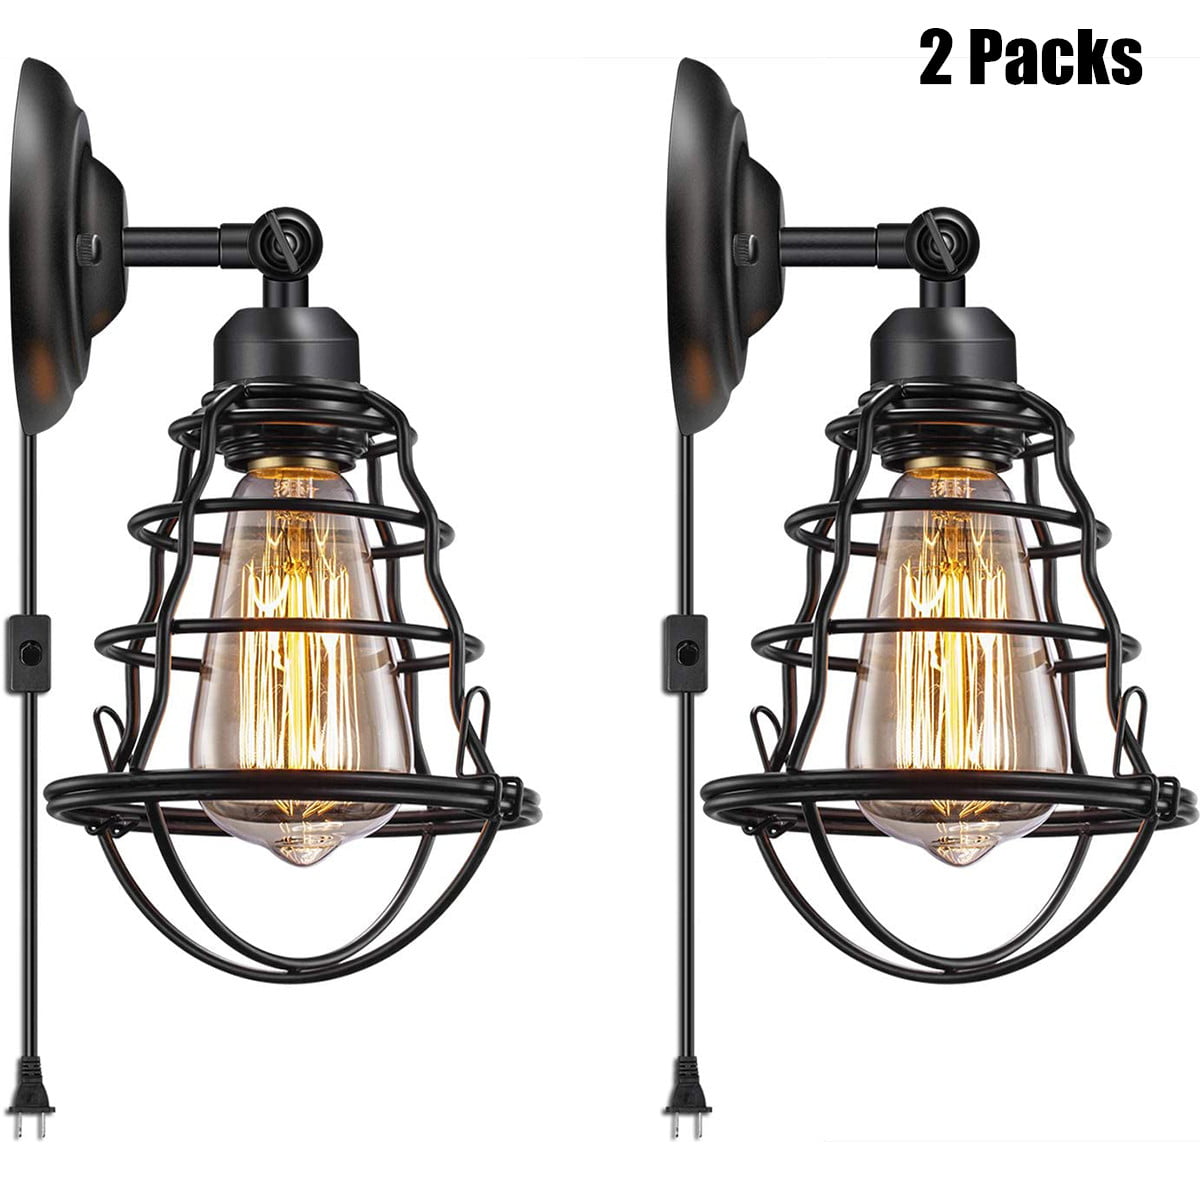 Yosoan 2 Pack Black Metal Wall Fixture Vintage Industrial Fixture Lighting Lamp with 6.9 Metal Shade and 4.7 Canopy Lamp Fixture for Bathroom Porch Bedroom Living Room Kitchen Study 